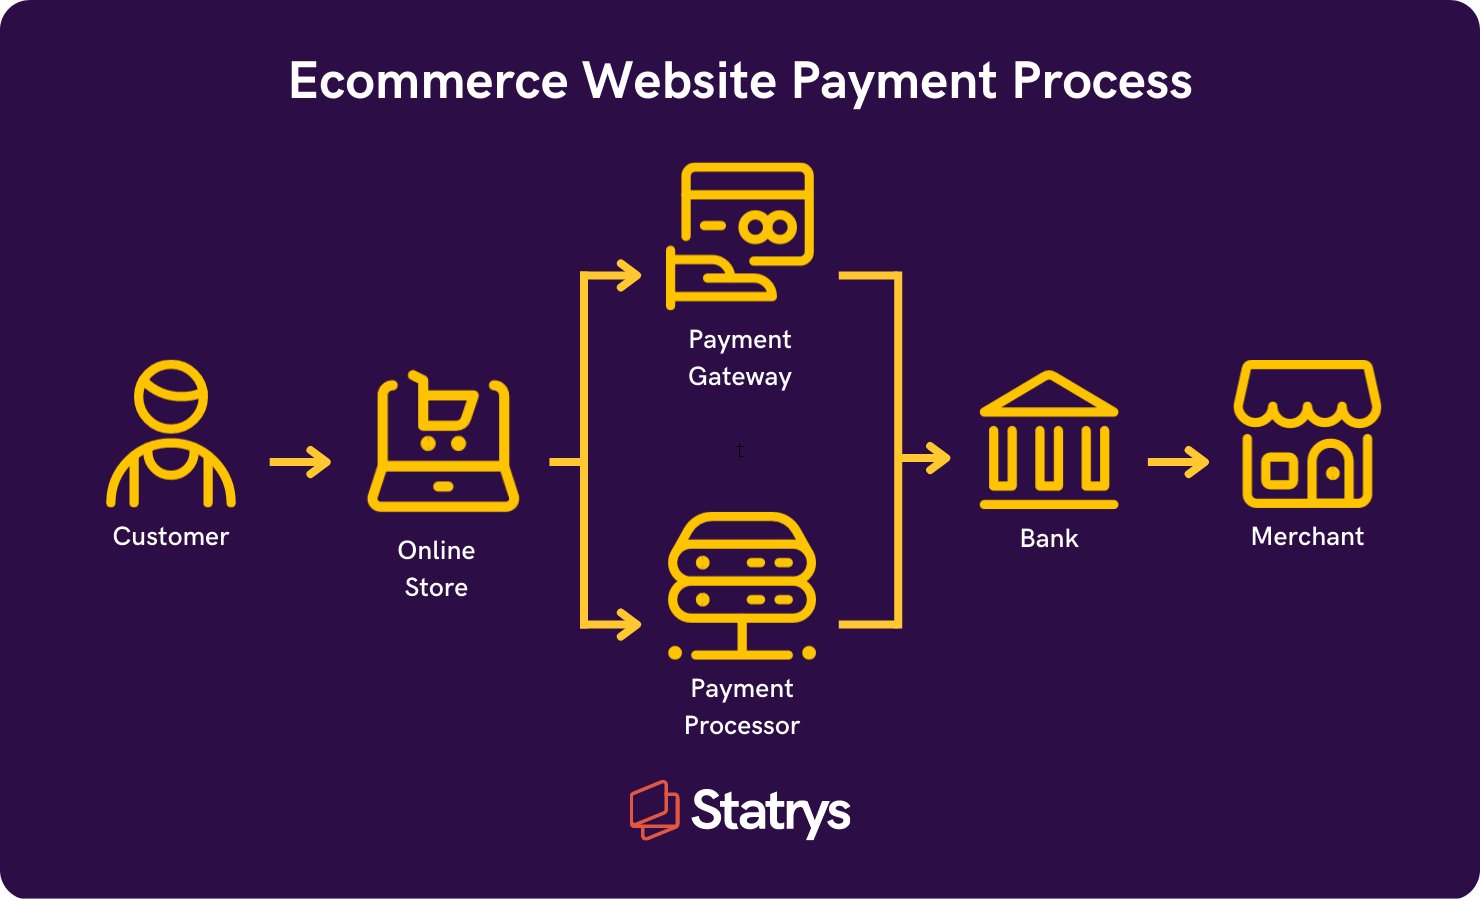 illustration of a payment process on an ecommerce website